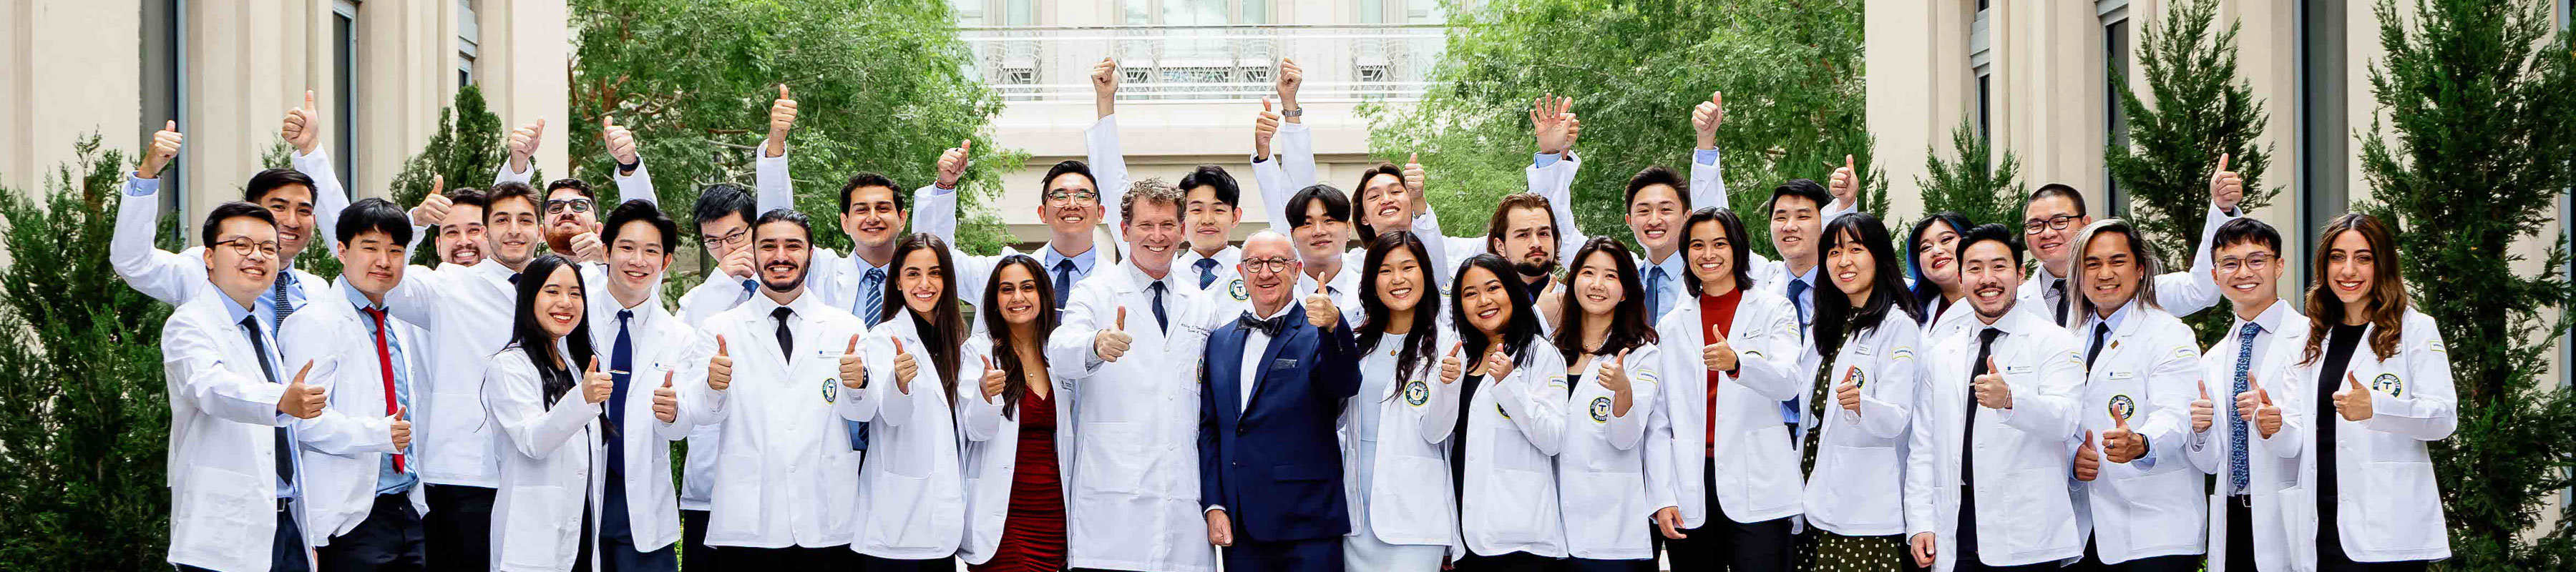 Dr. Gilliar and Dr. Tompkins in the center of a group of Osteopathic Medicine students in an outdoor courtyard. The students wear their white coats gesture a thumbs up.